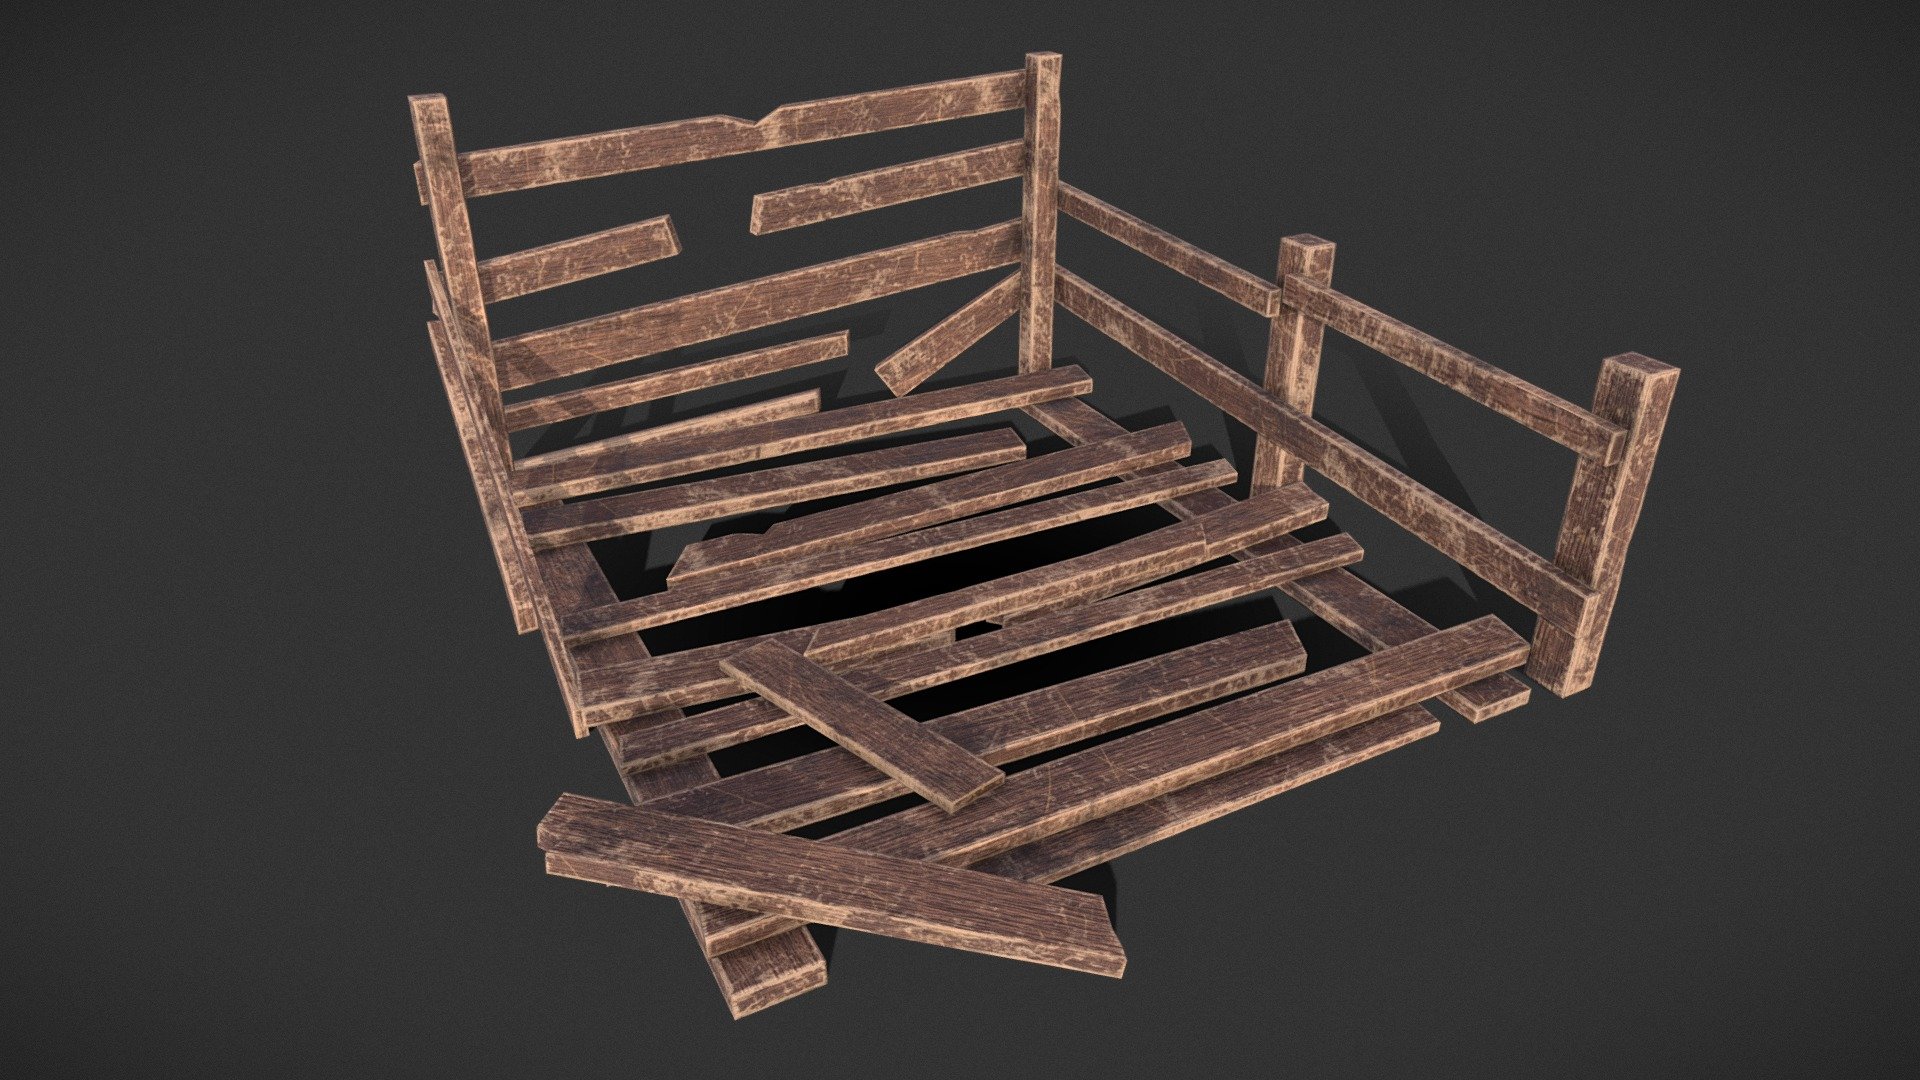 Wood Arrangement 3D Model

we also can provide, Muddy, and Very Muddy Textures. All Grey Background Preview Renders were done in Marmoset Toolbag 3.06. All Other Renders were Done in Unreal Wood Uvs all going the right direction to easily add any wood texture. One Mesh. One Material / UV. PBR Materials 4096x4096

All Preview Renders with Grey Background were done in Marmoset Toolbag 3.06 3d model